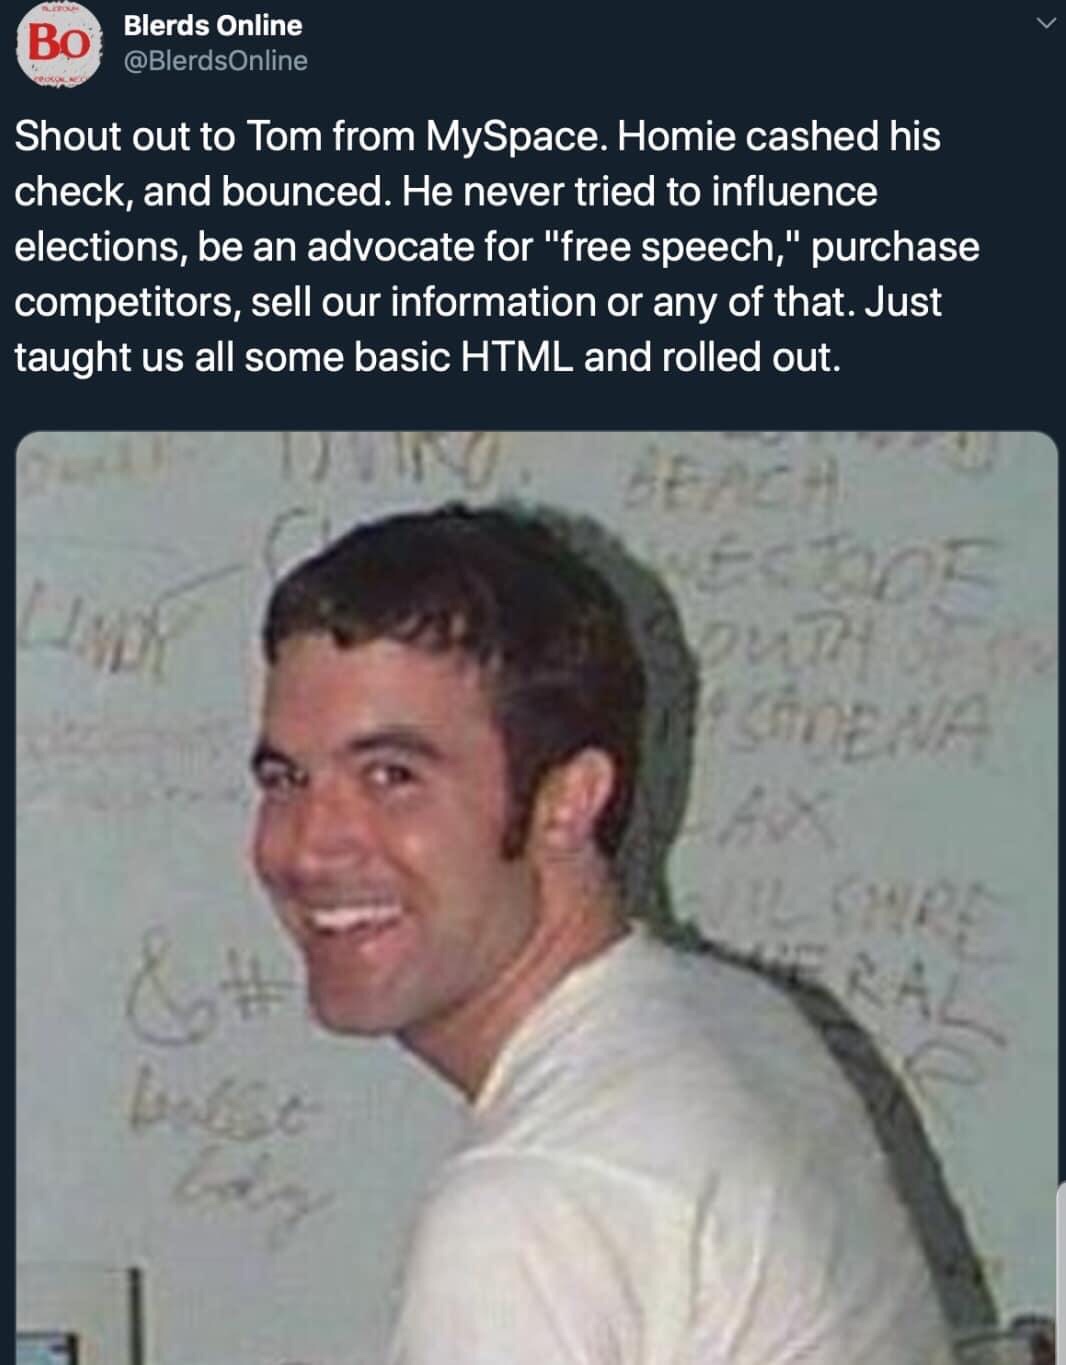 tom myspace - Blerds Online Shout out to Tom from MySpace. Homie cashed his check, and bounced. He never tried to influence elections, be an advocate for "free speech," purchase competitors, sell our information or any of that. Just taught us all some bas